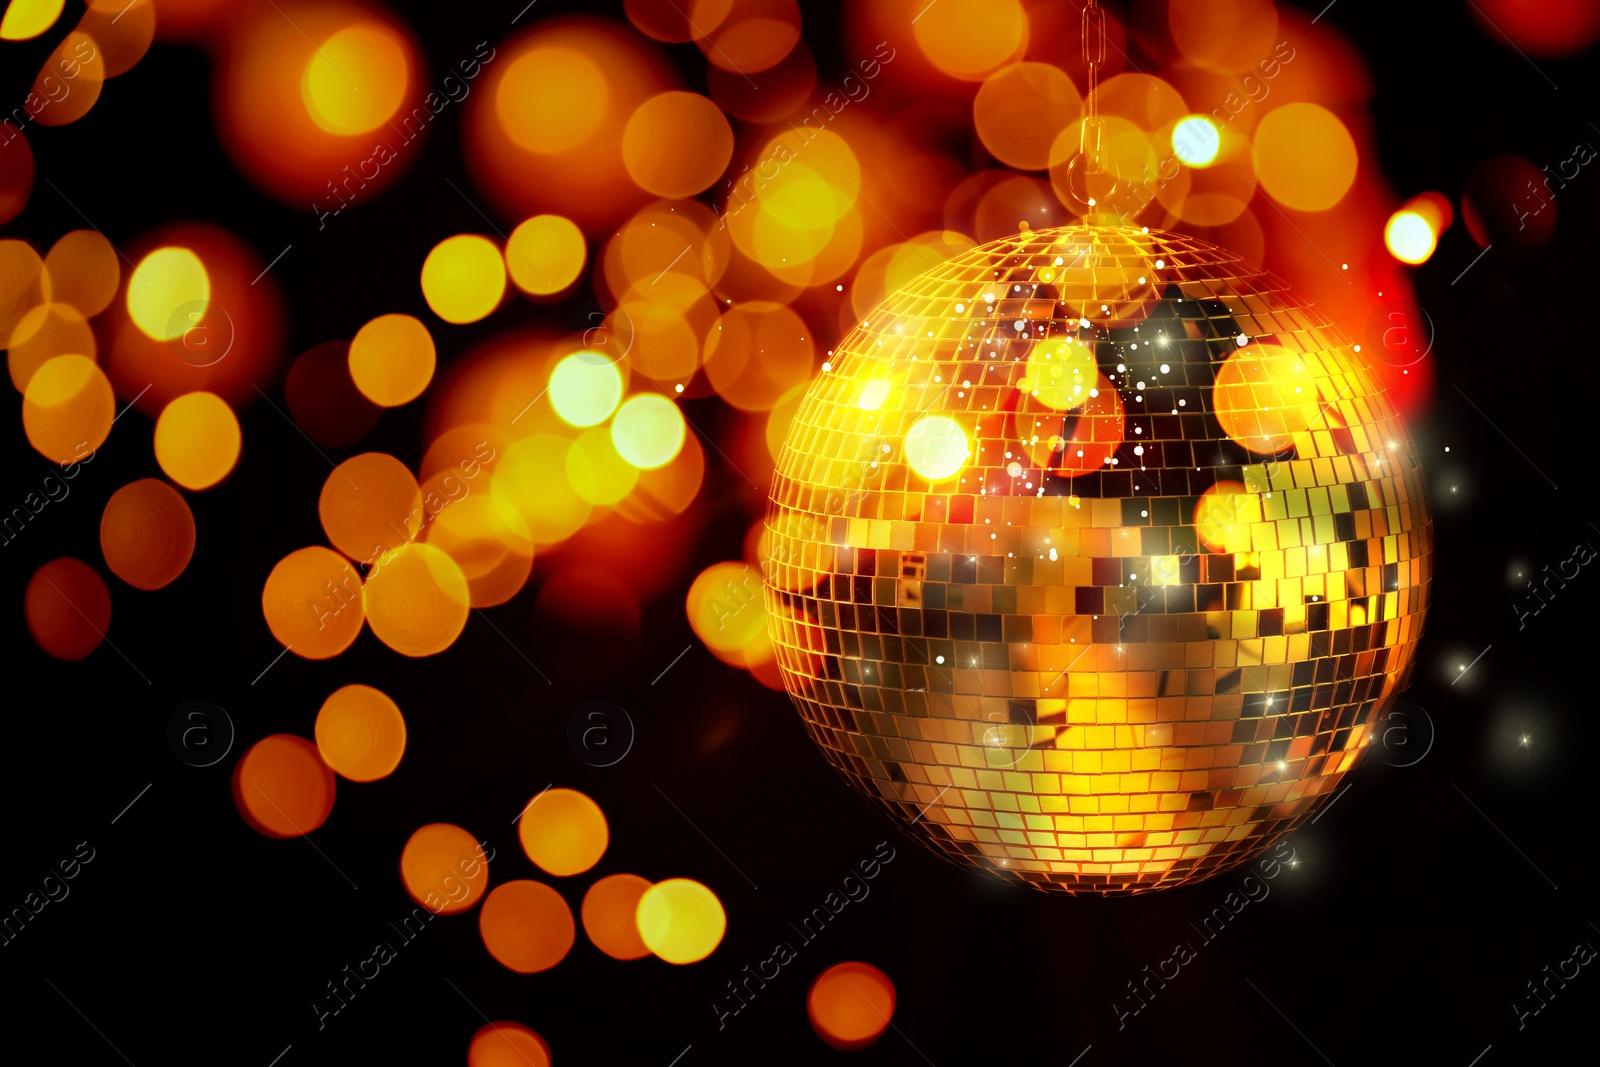 Image of Shiny disco ball on black background with blurred lights, bokeh effect